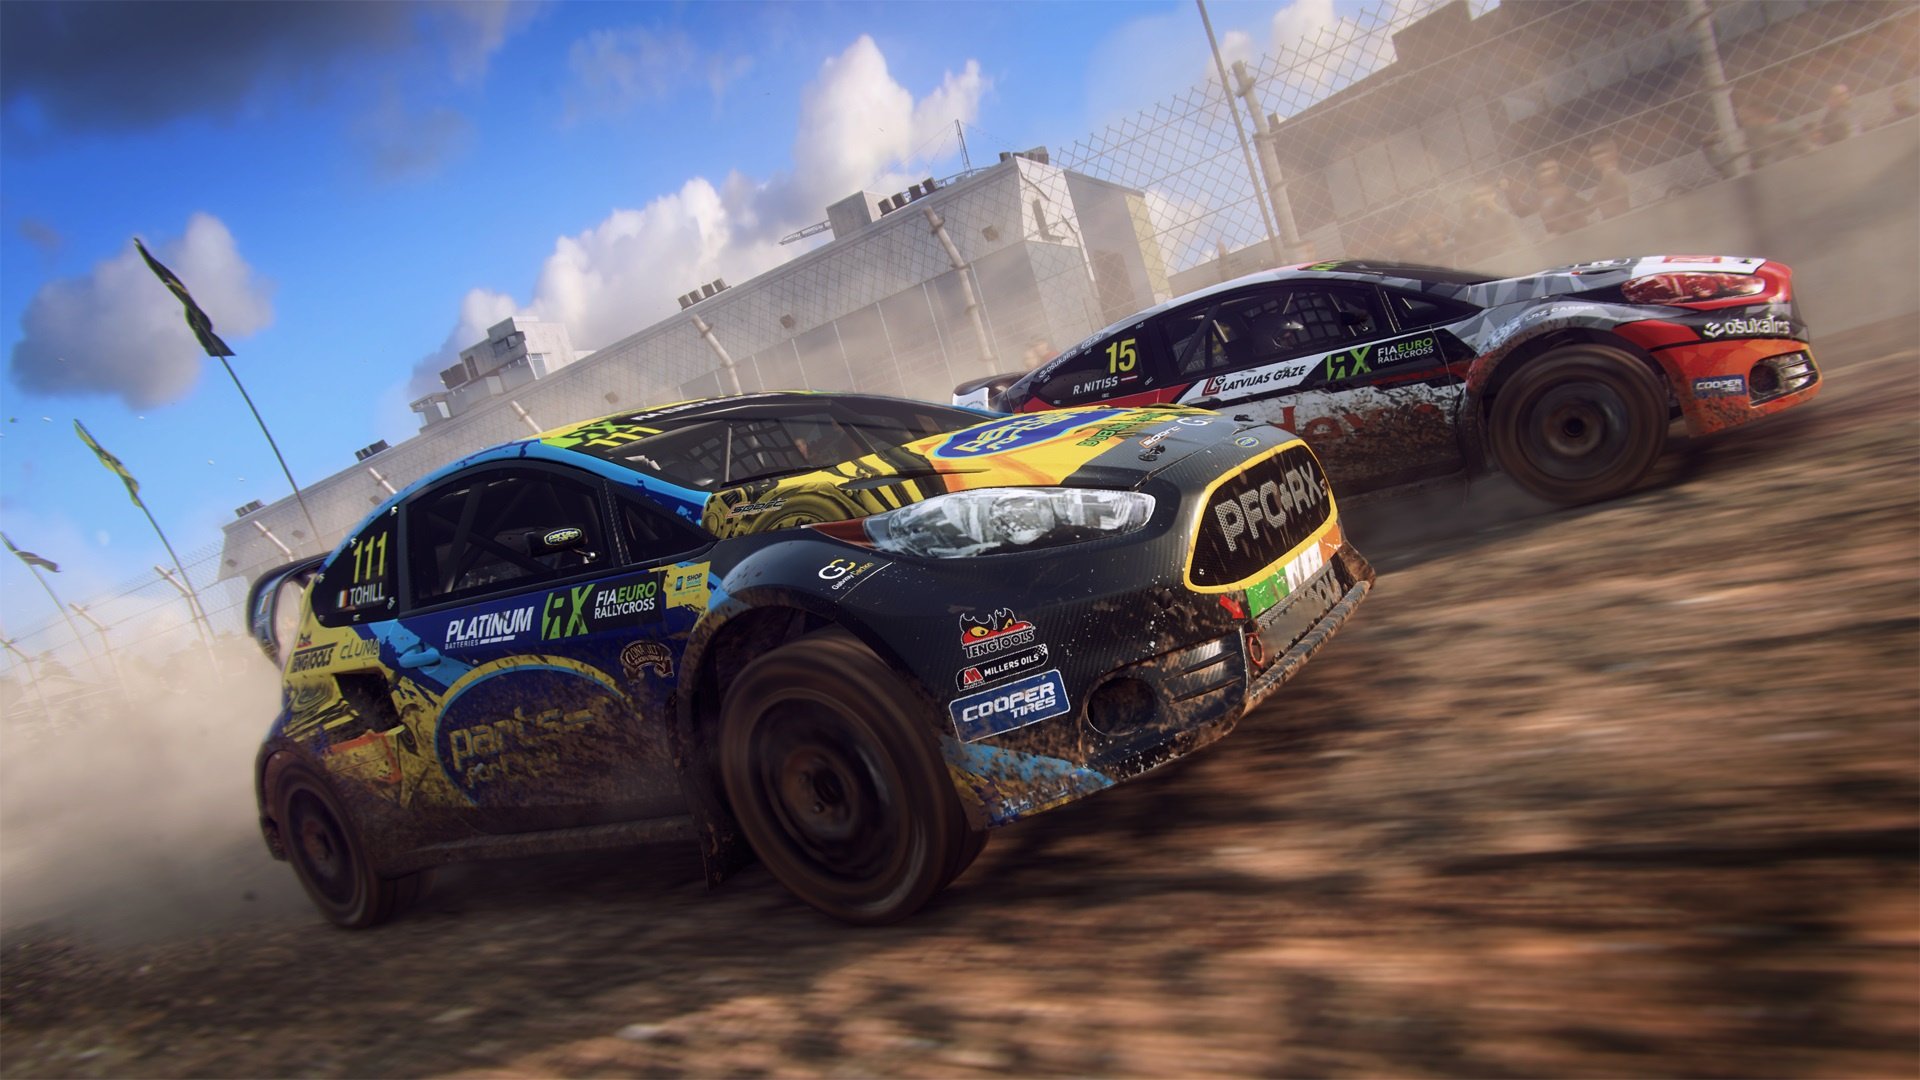 dirt 4 ps4 review